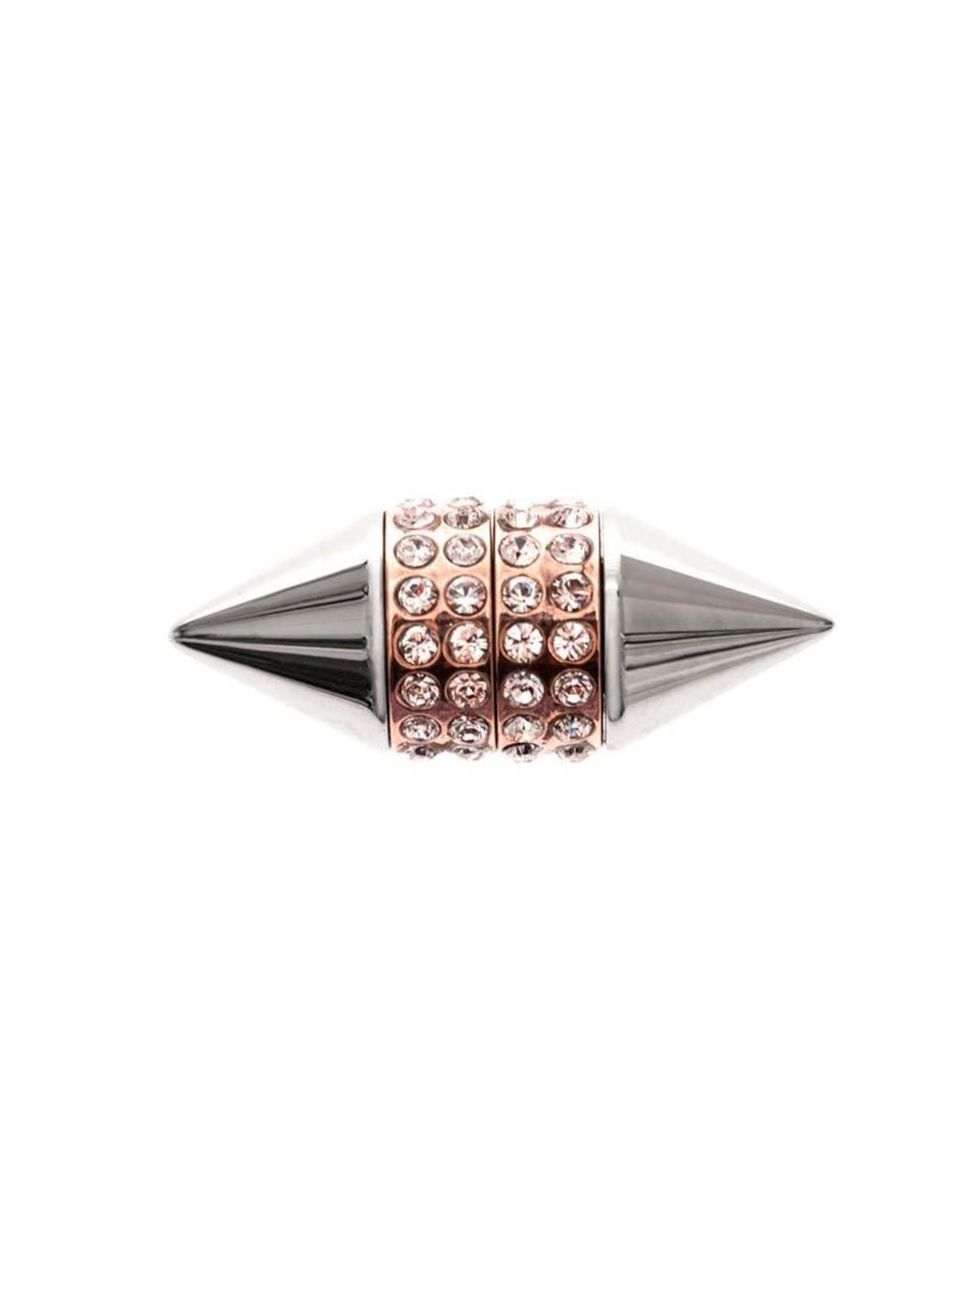 <p>Sometimes it's the small things that make all the difference..</p><p>Magnetic earring  £180 by Givenchy from <a href="http://www.matchesfashion.com/product/185704?country=UK&amp;currency=GBP&amp;vzwty=cgid:3651662457%7Ctsid:15858%7Ccid:77447577%7Clid:4